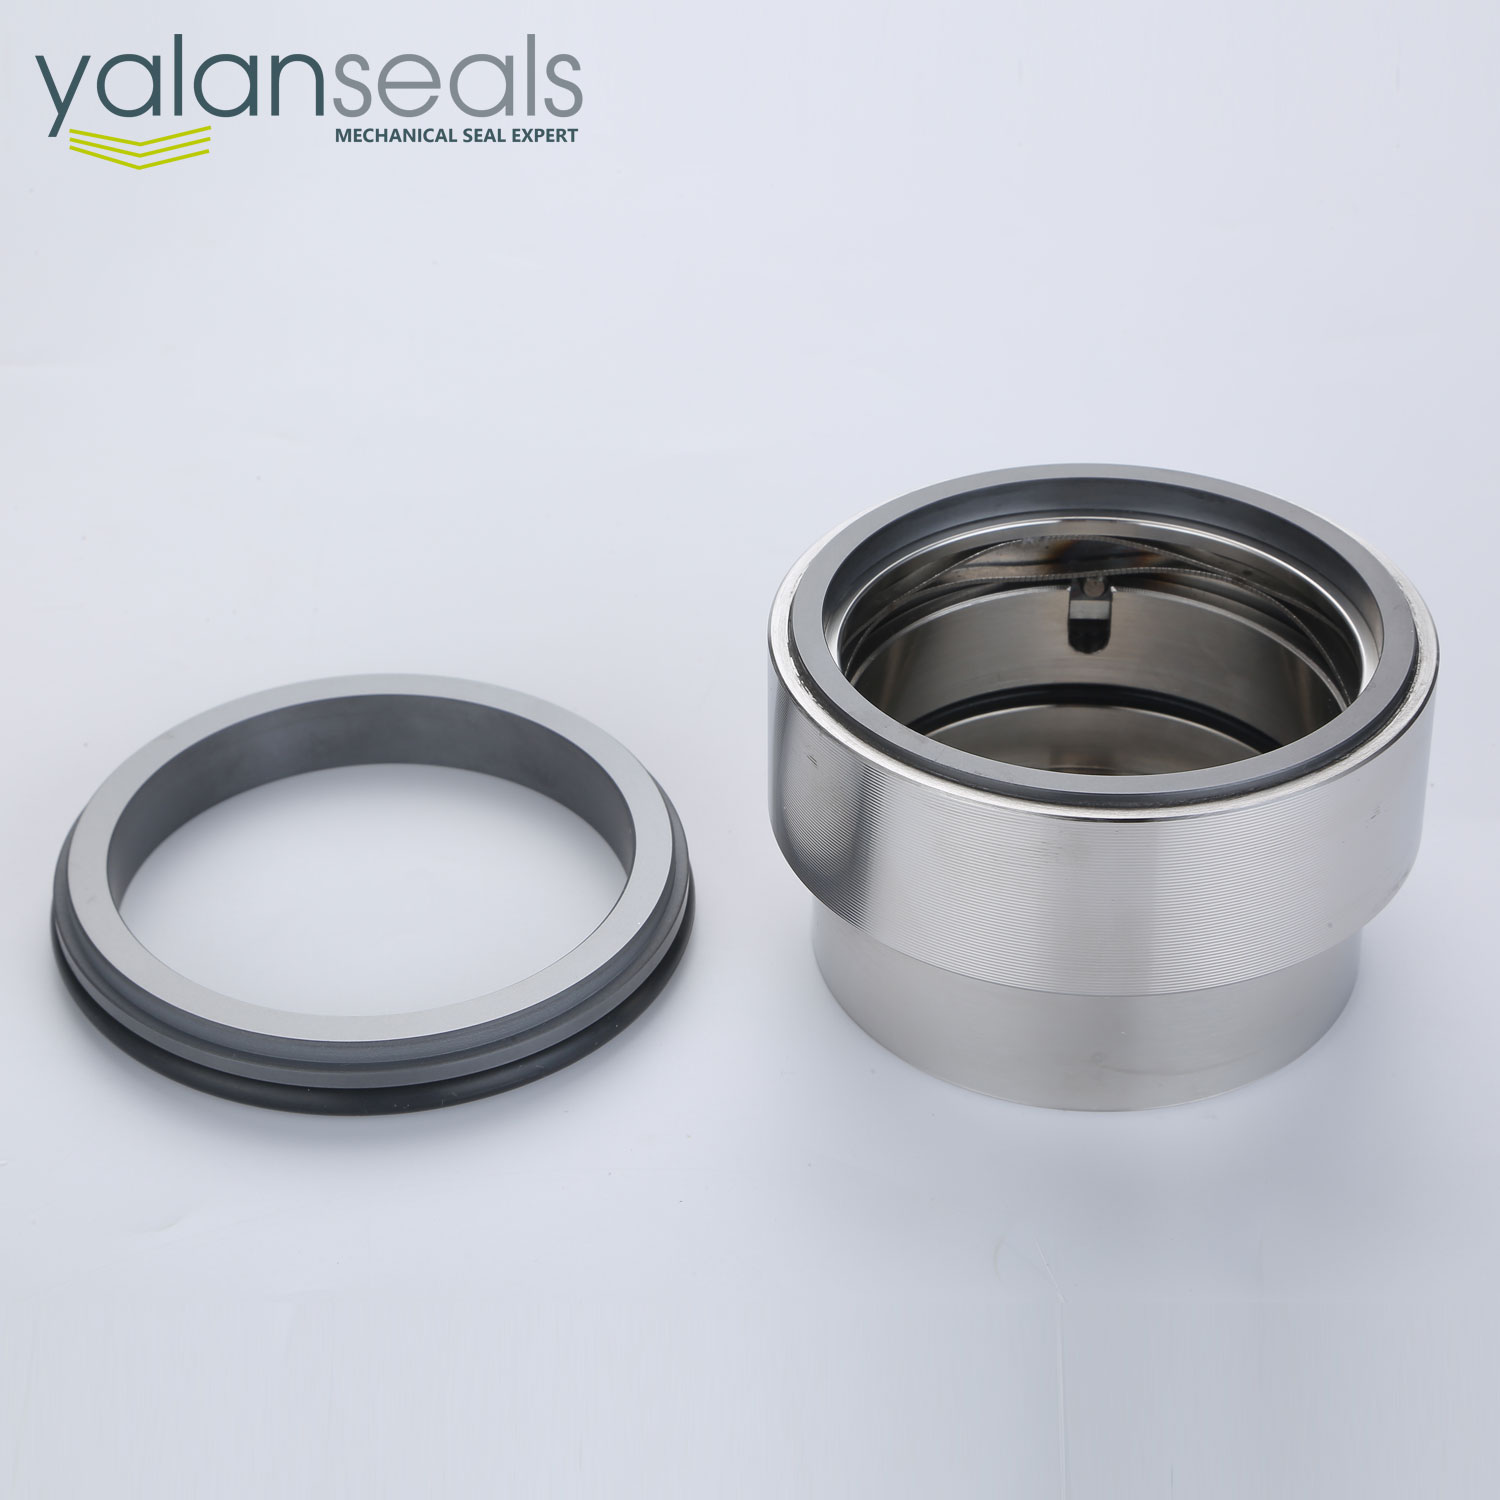 AK5M Mechanical Seal for Paper-making Equipment and other Industrial Pumps